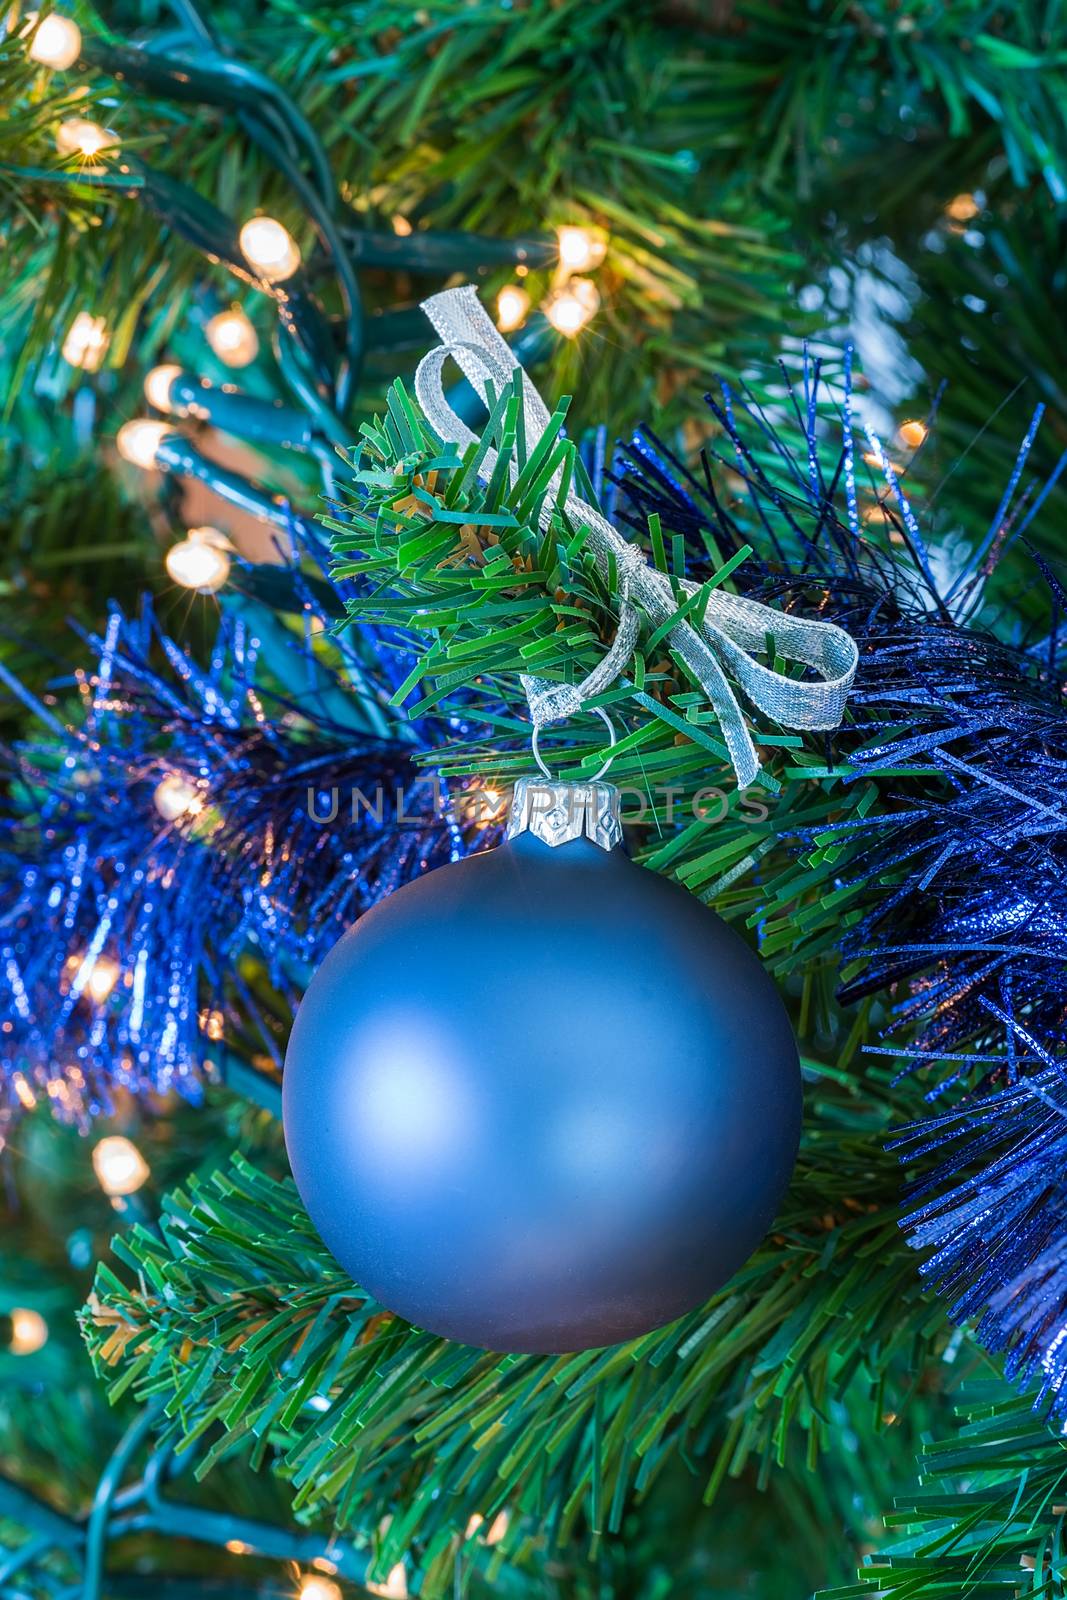 Blue Christmas ball hanging in tree by BenSchonewille